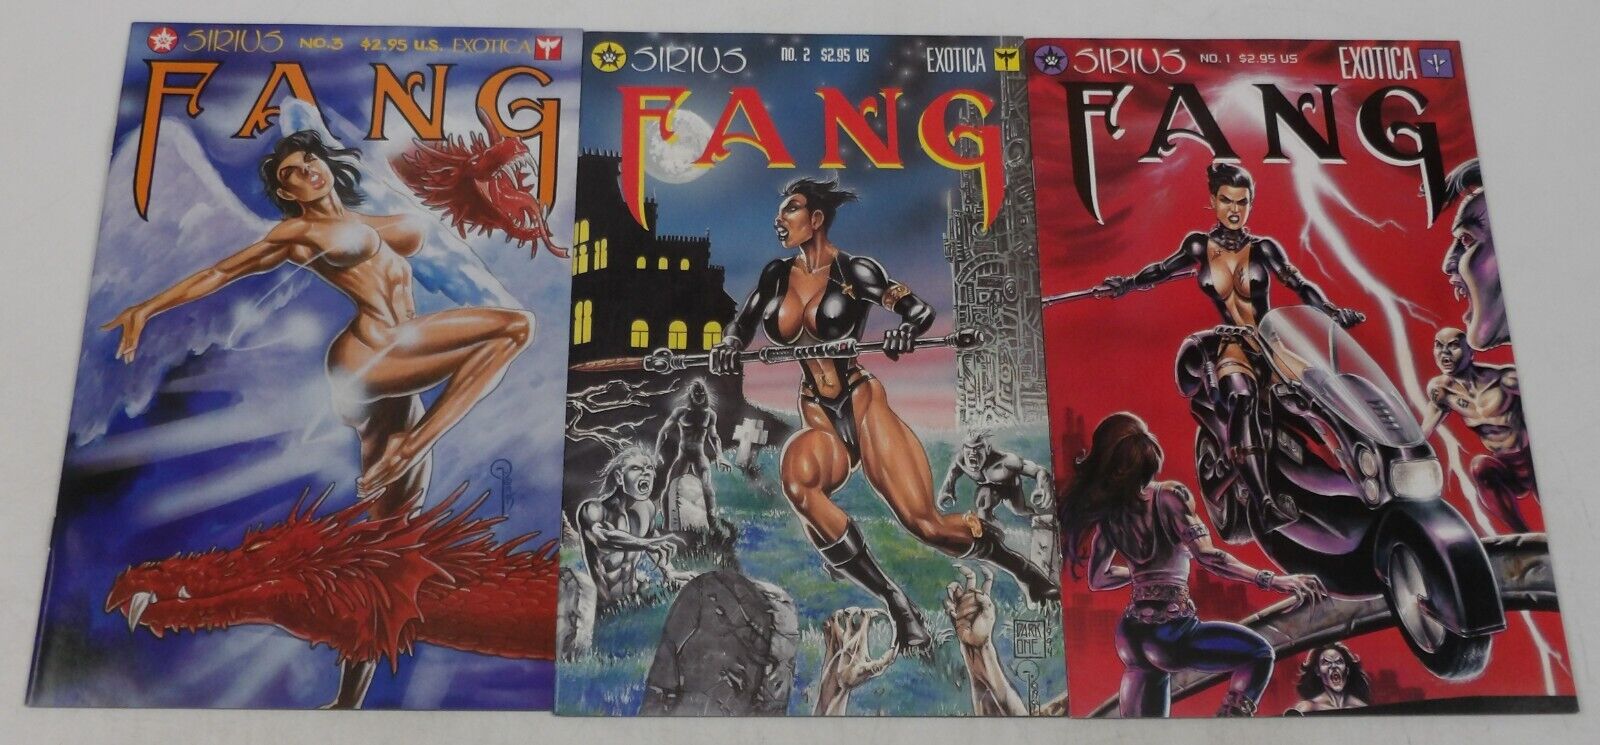 Fang #1-3 VF/NM complete series Kevin J. Taylor exotica 1995 Sirius bad girl 2